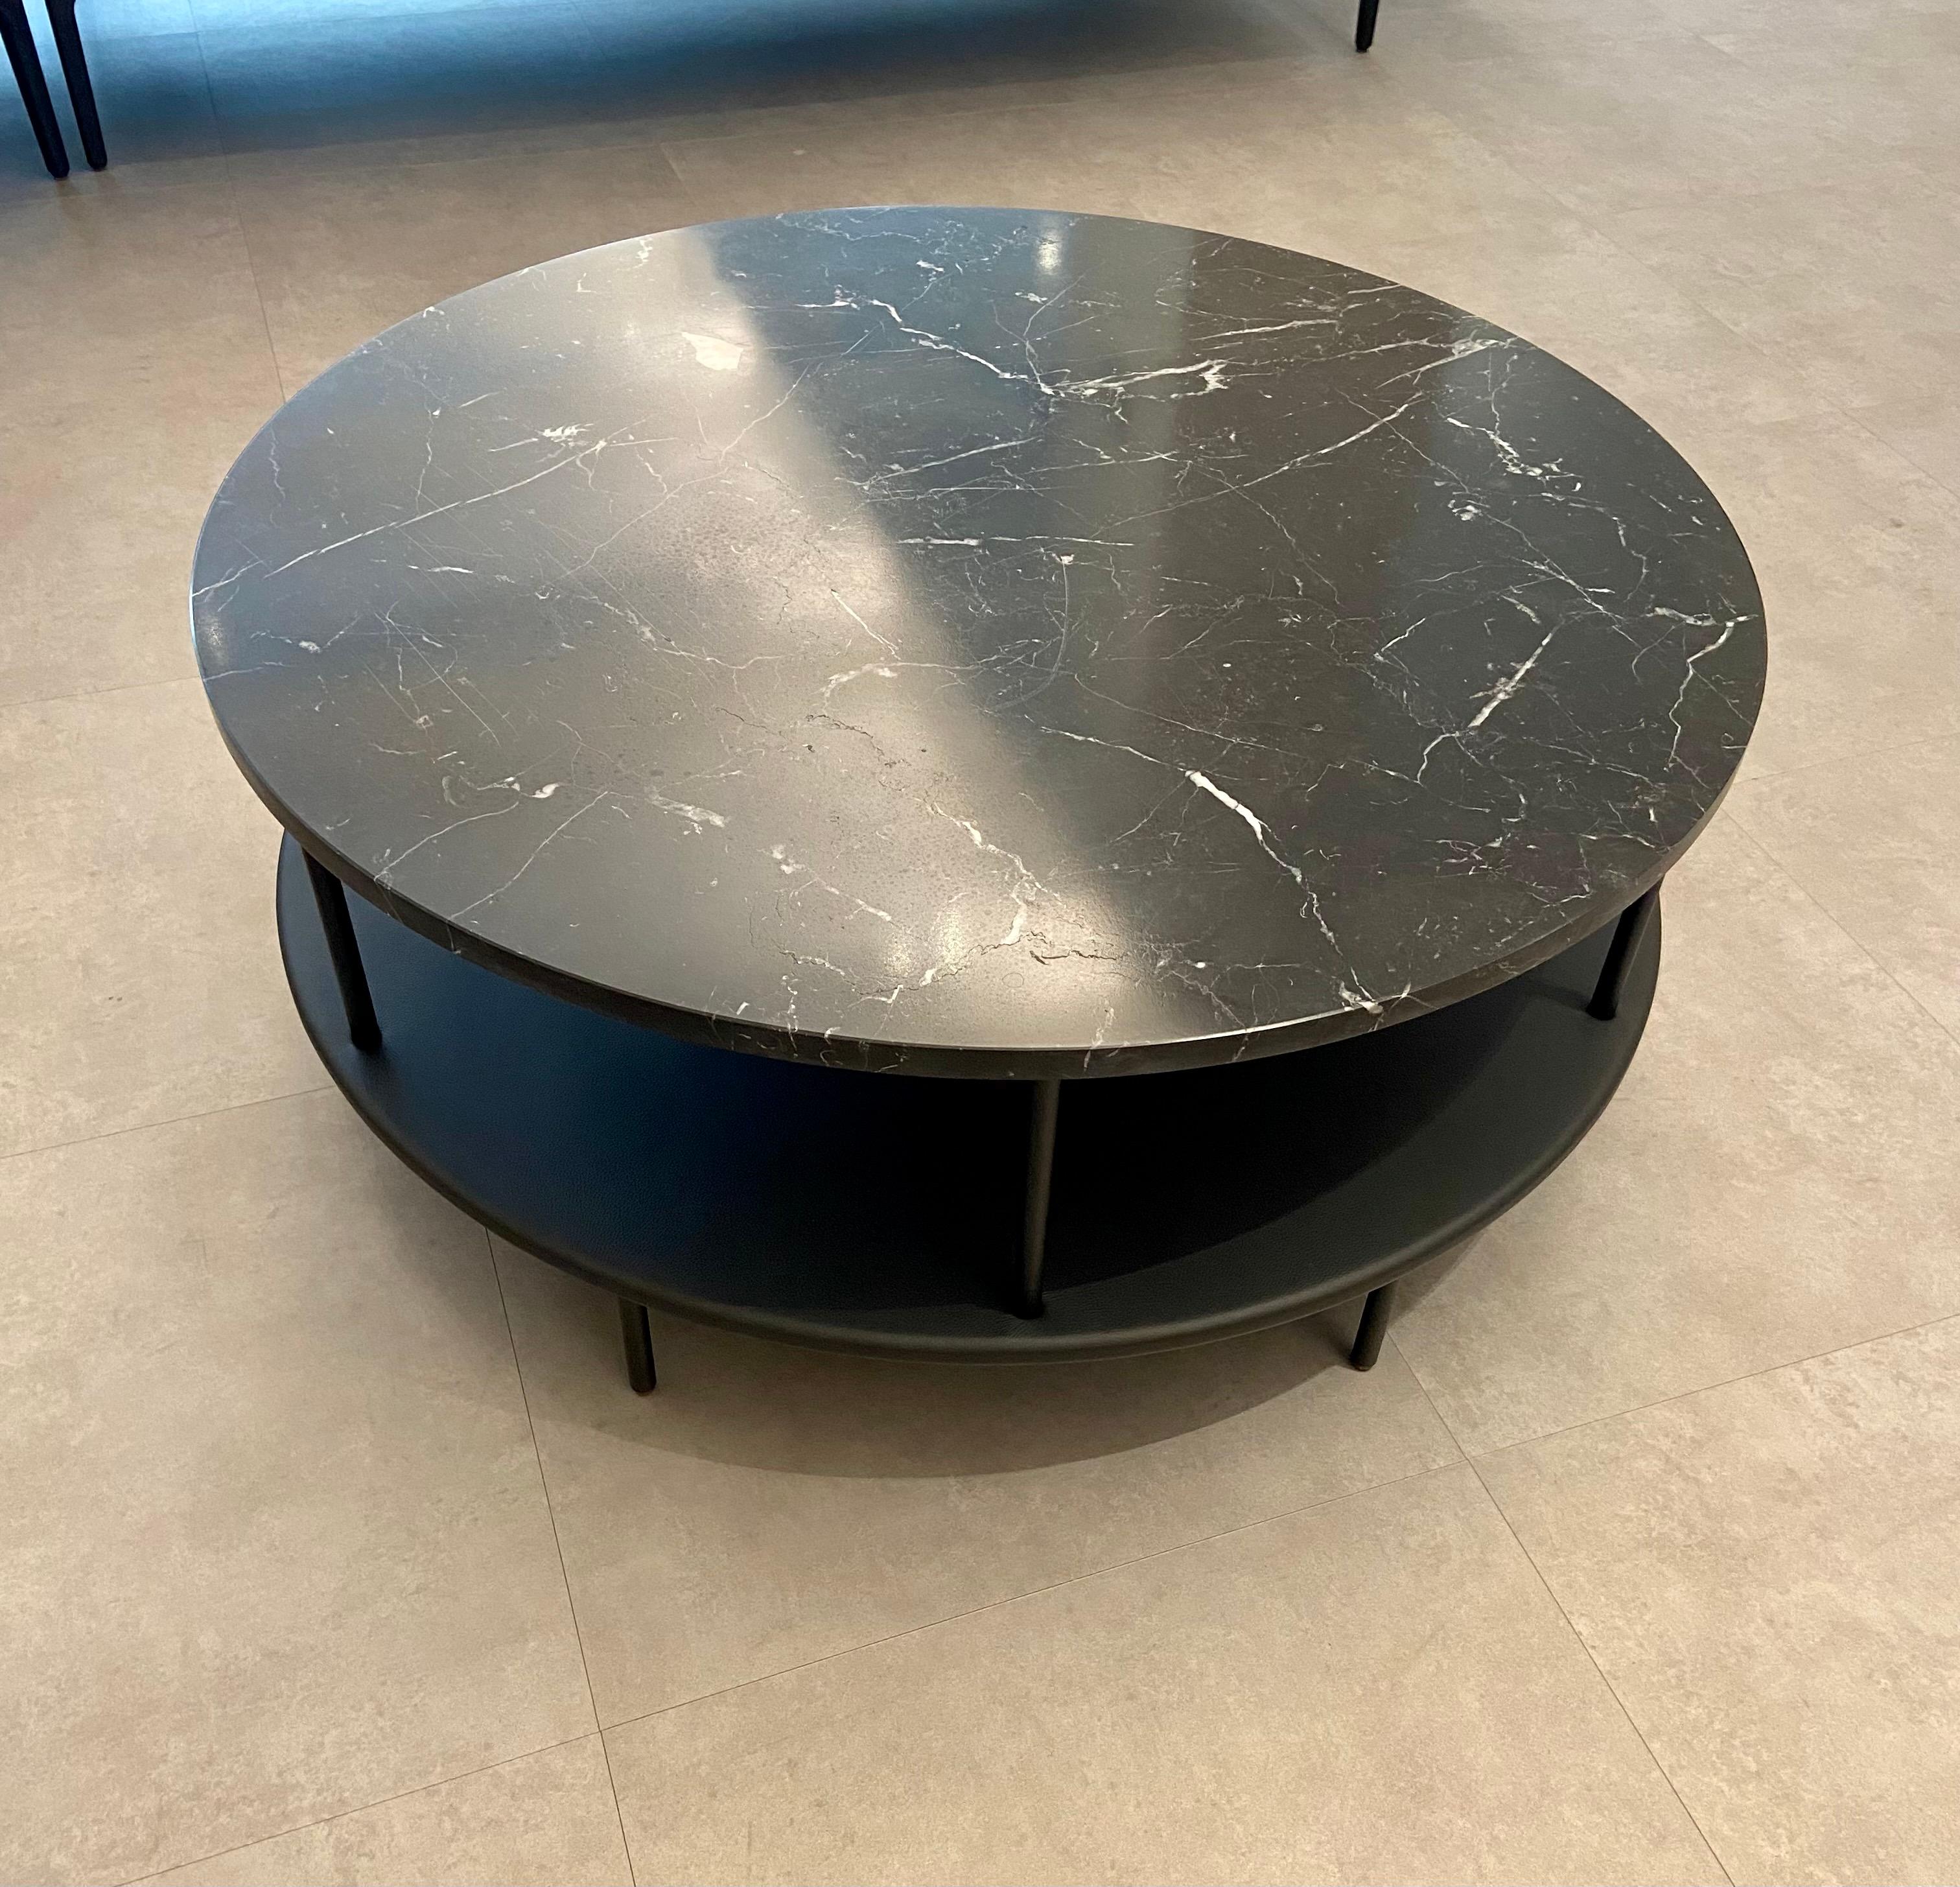 The DD table brings refinement to any furnishings with its playful use of precious materials and the subtle break in the lines. Two table tops, the bottom covered with leather, the top in marble, connected with aluminum rods. They are offset,